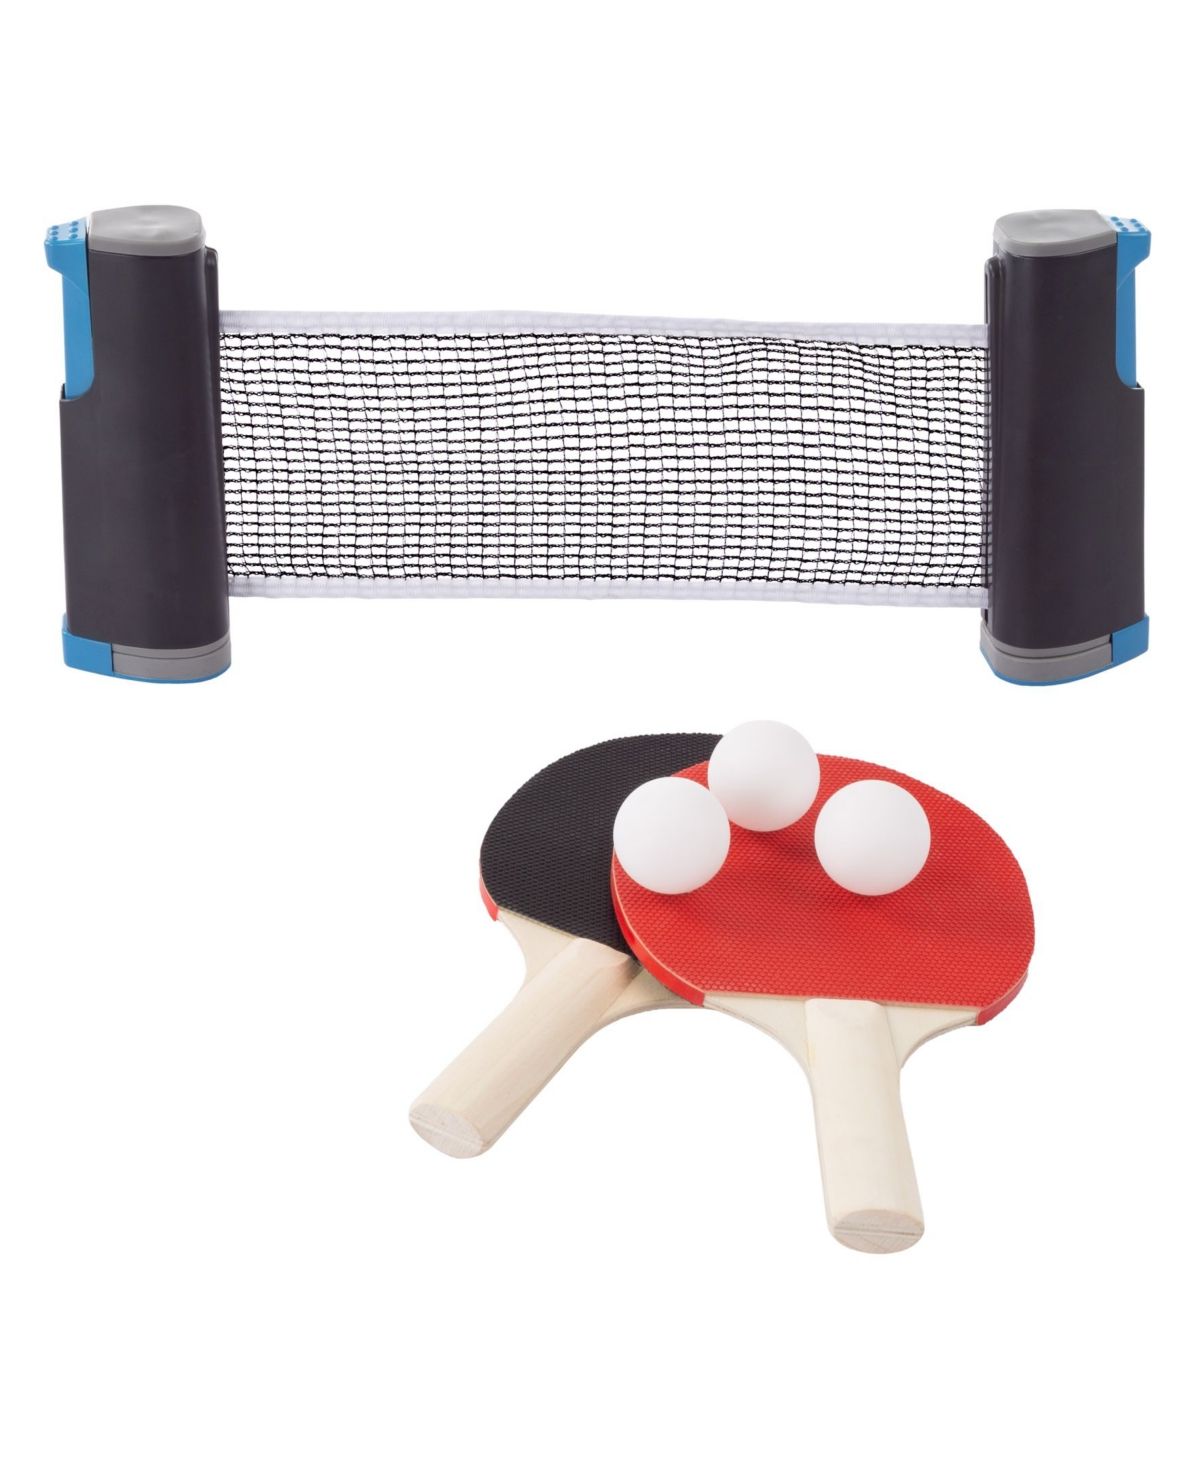 Hey Play Table Tennis Set - Portable Instant Two Player Game With Retractable Net, Wooden Paddles An | Macys (US)